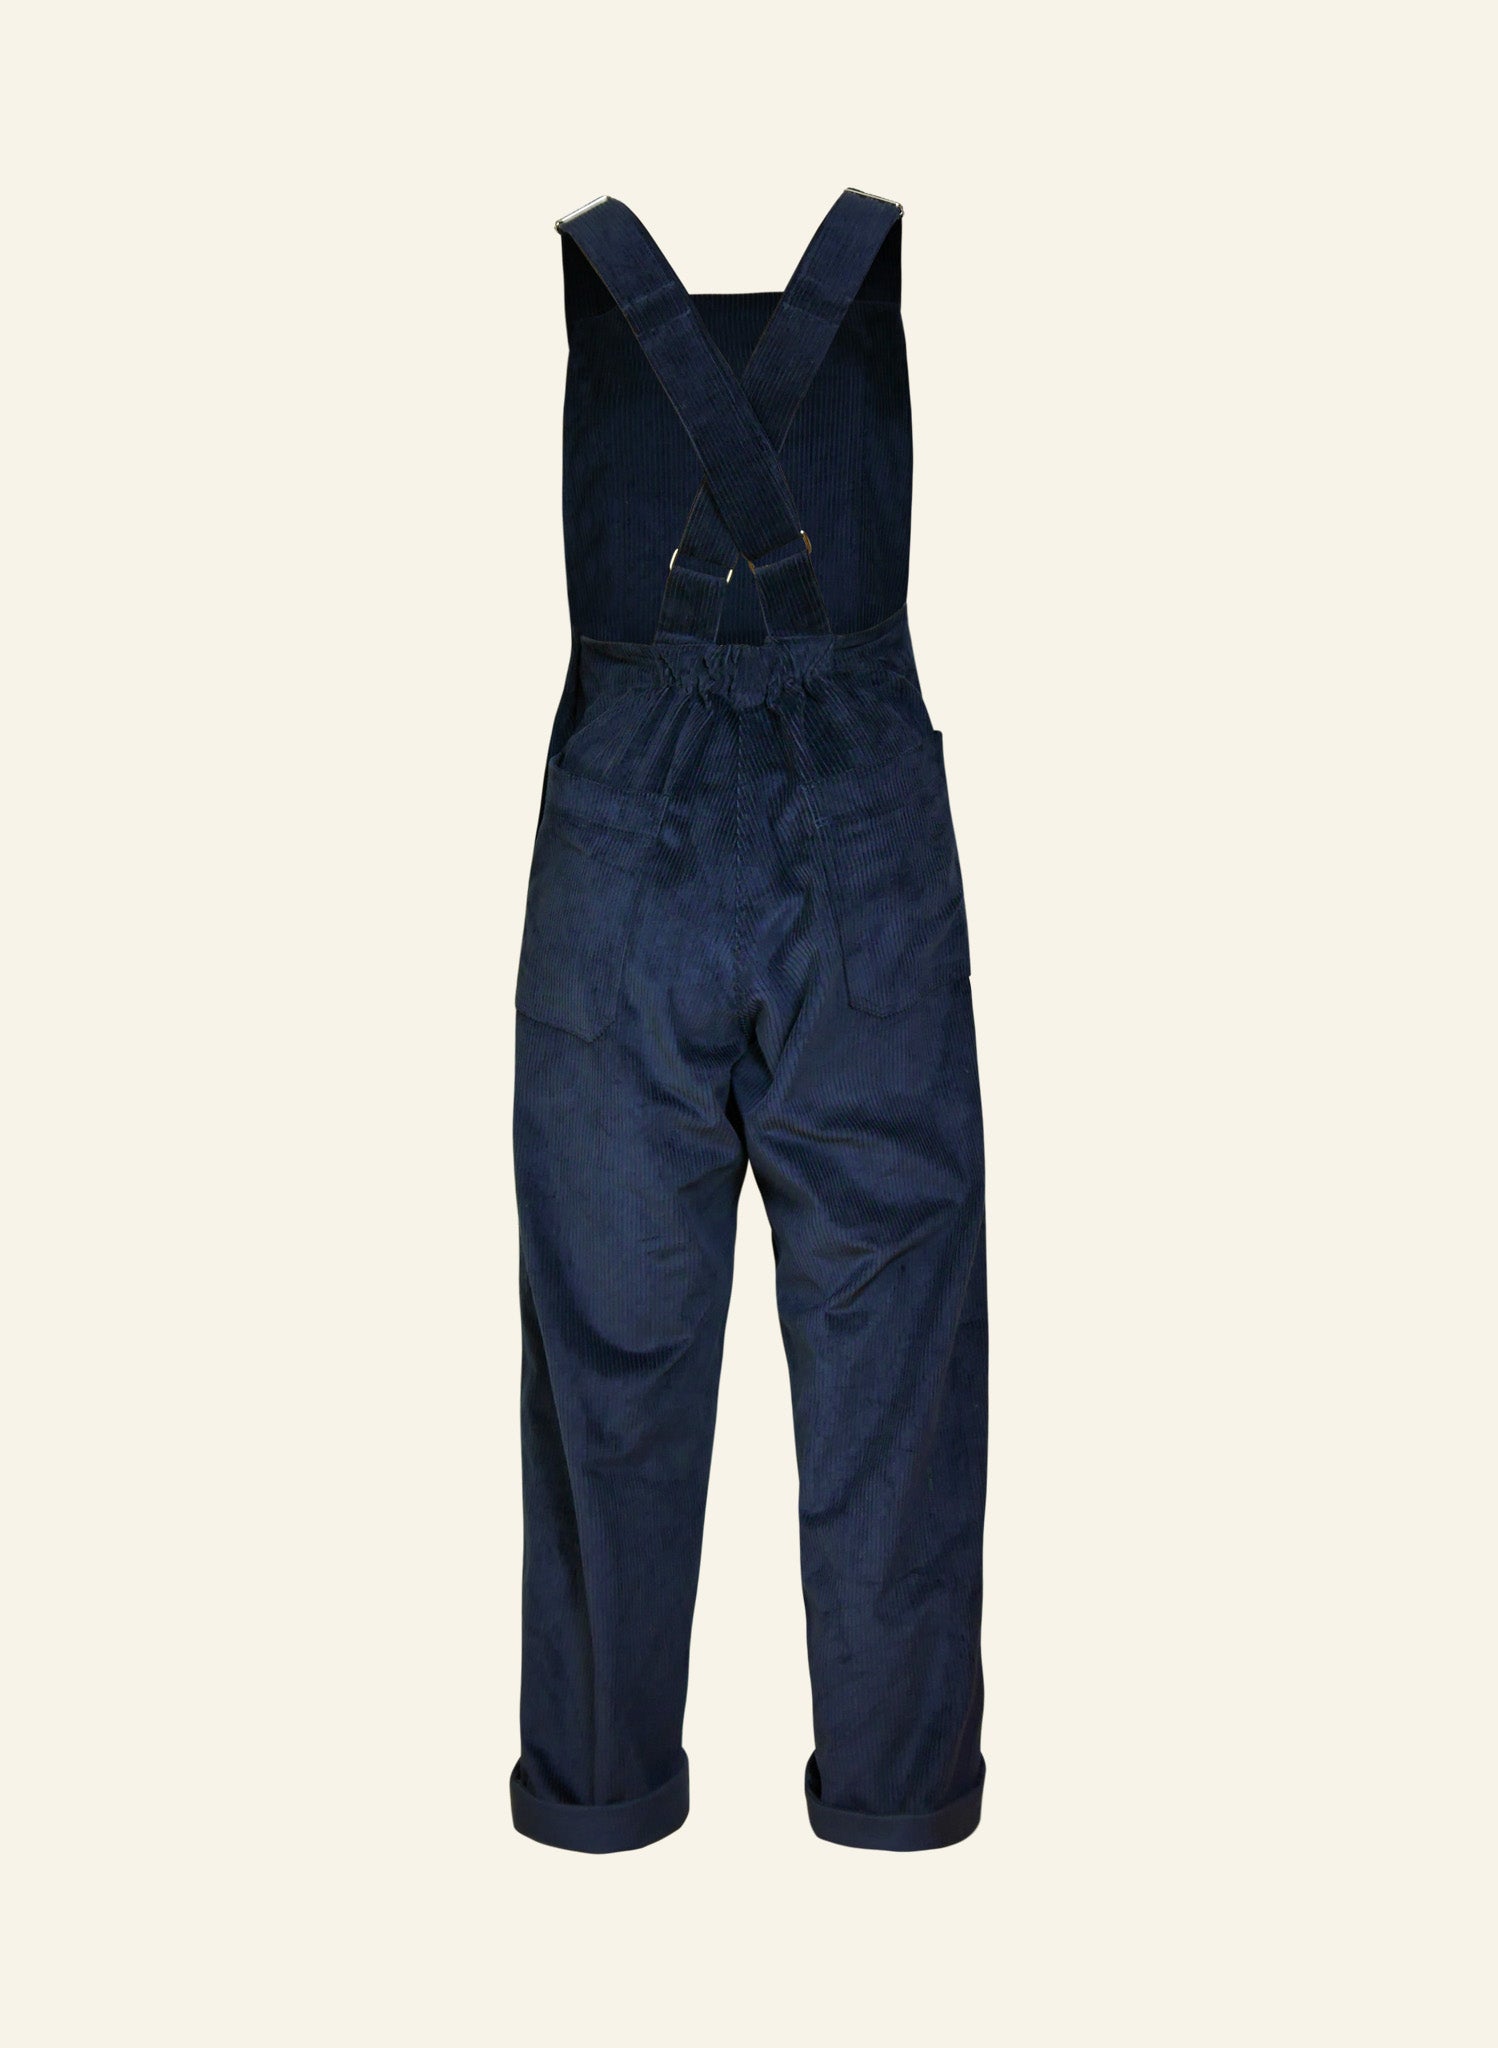 Women's Cotton Dungaree, Navy Blue Overall by MOUSQUETON GLAZY